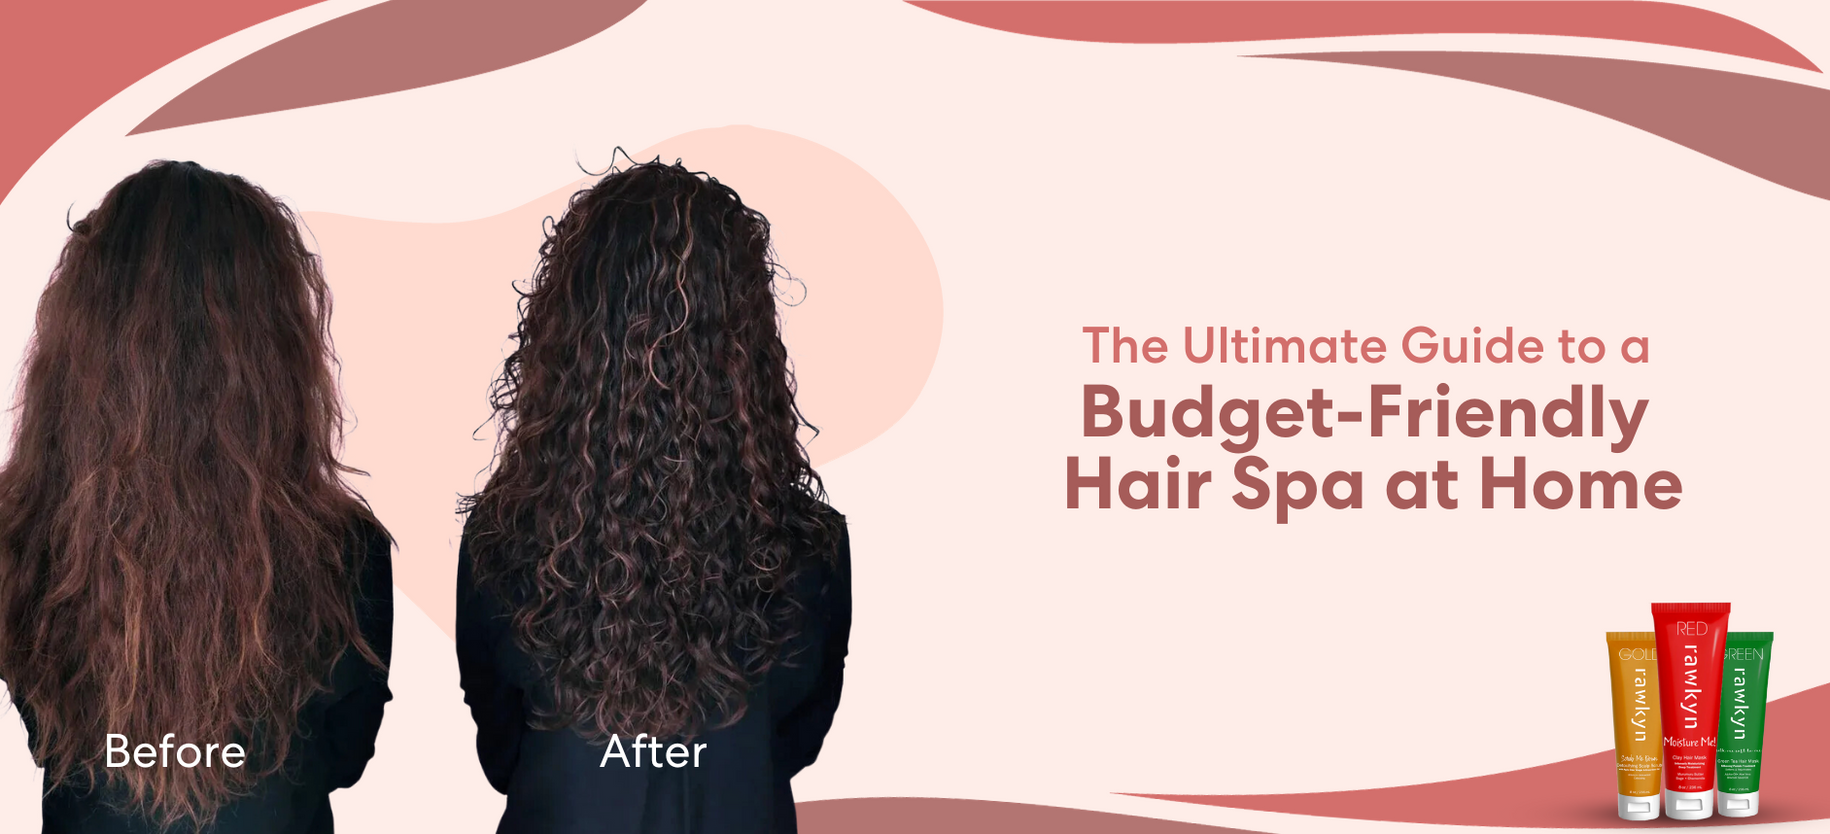 The Ultimate Guide to a Budget-Friendly Hair Spa at Home